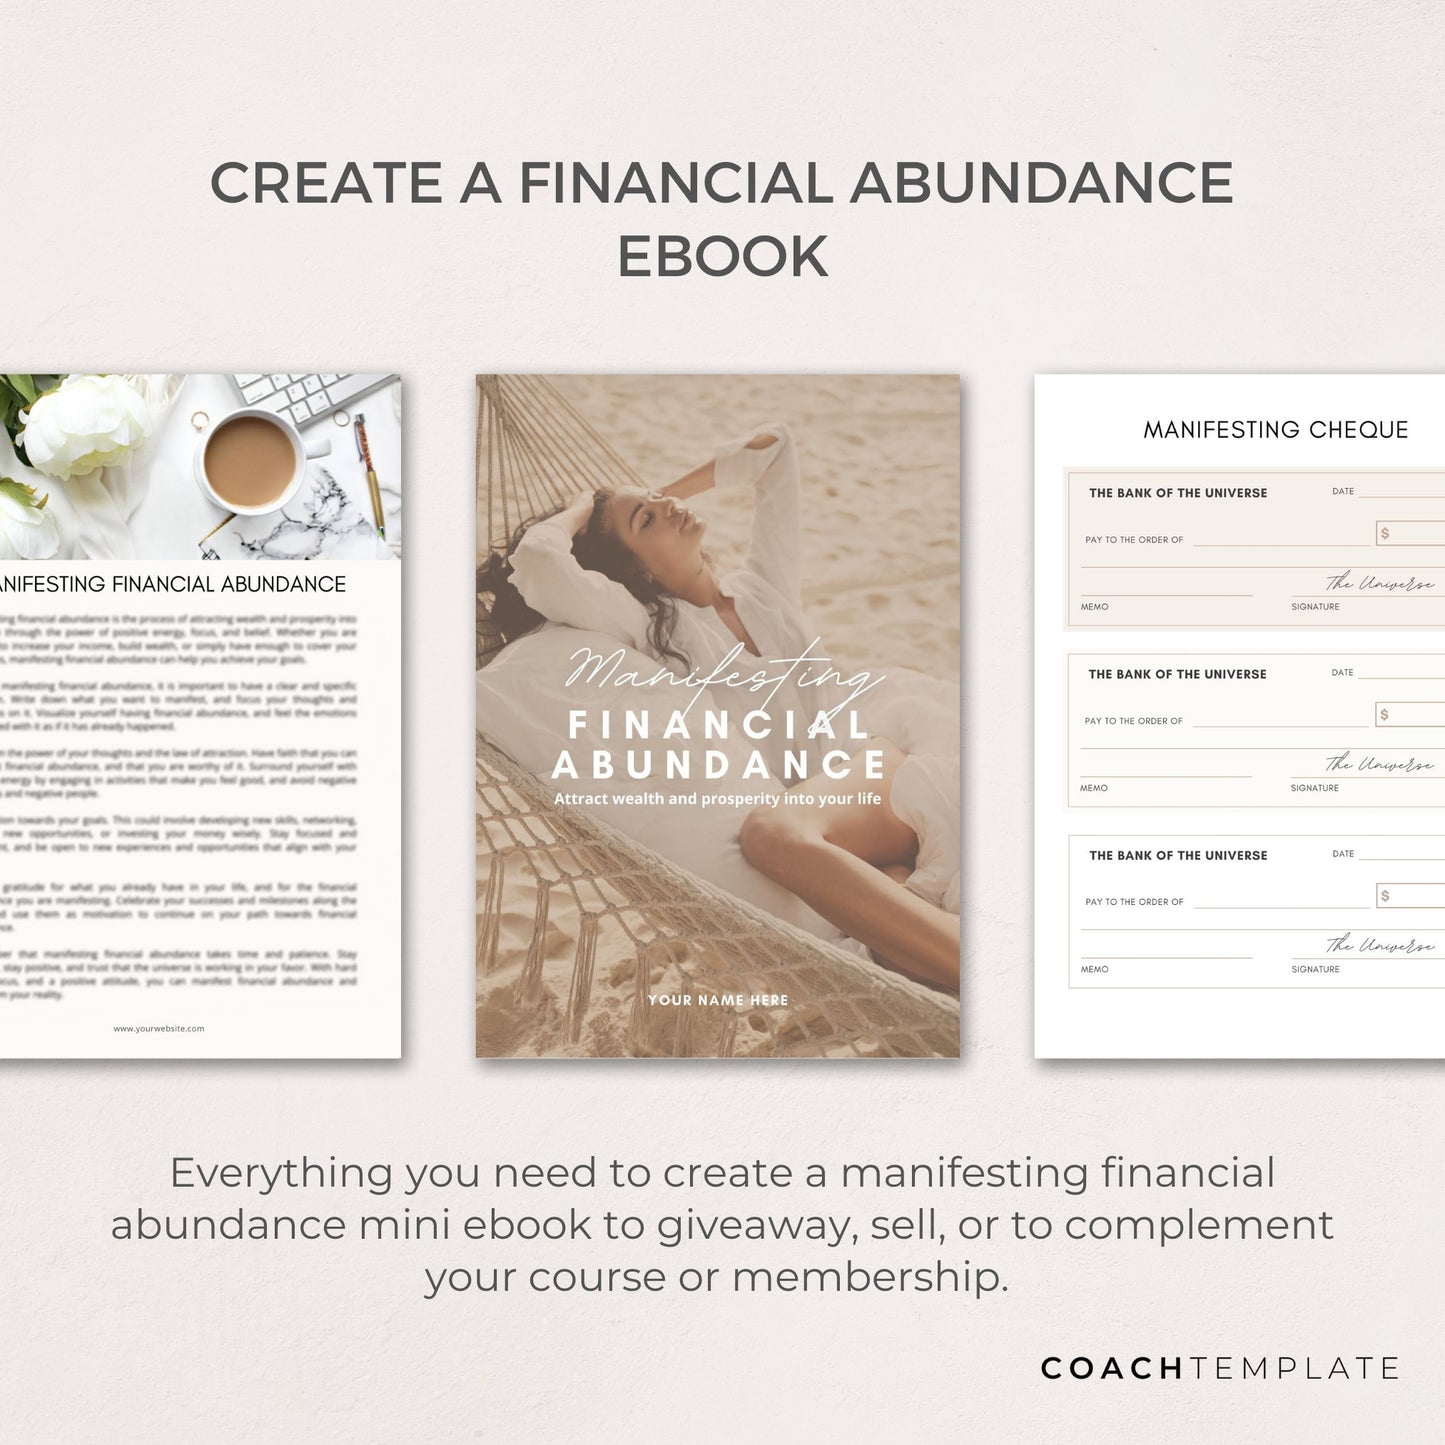 Money Manifesting eBook Canva Template, Financial Abundance Manifestation, Mindset Life Spiritual Wellness Coach or Small Business, Lead Magnet, Commercial Use, Law of Attraction, Done-for-you content with Cheque Template

CoachTemplate.com CT056